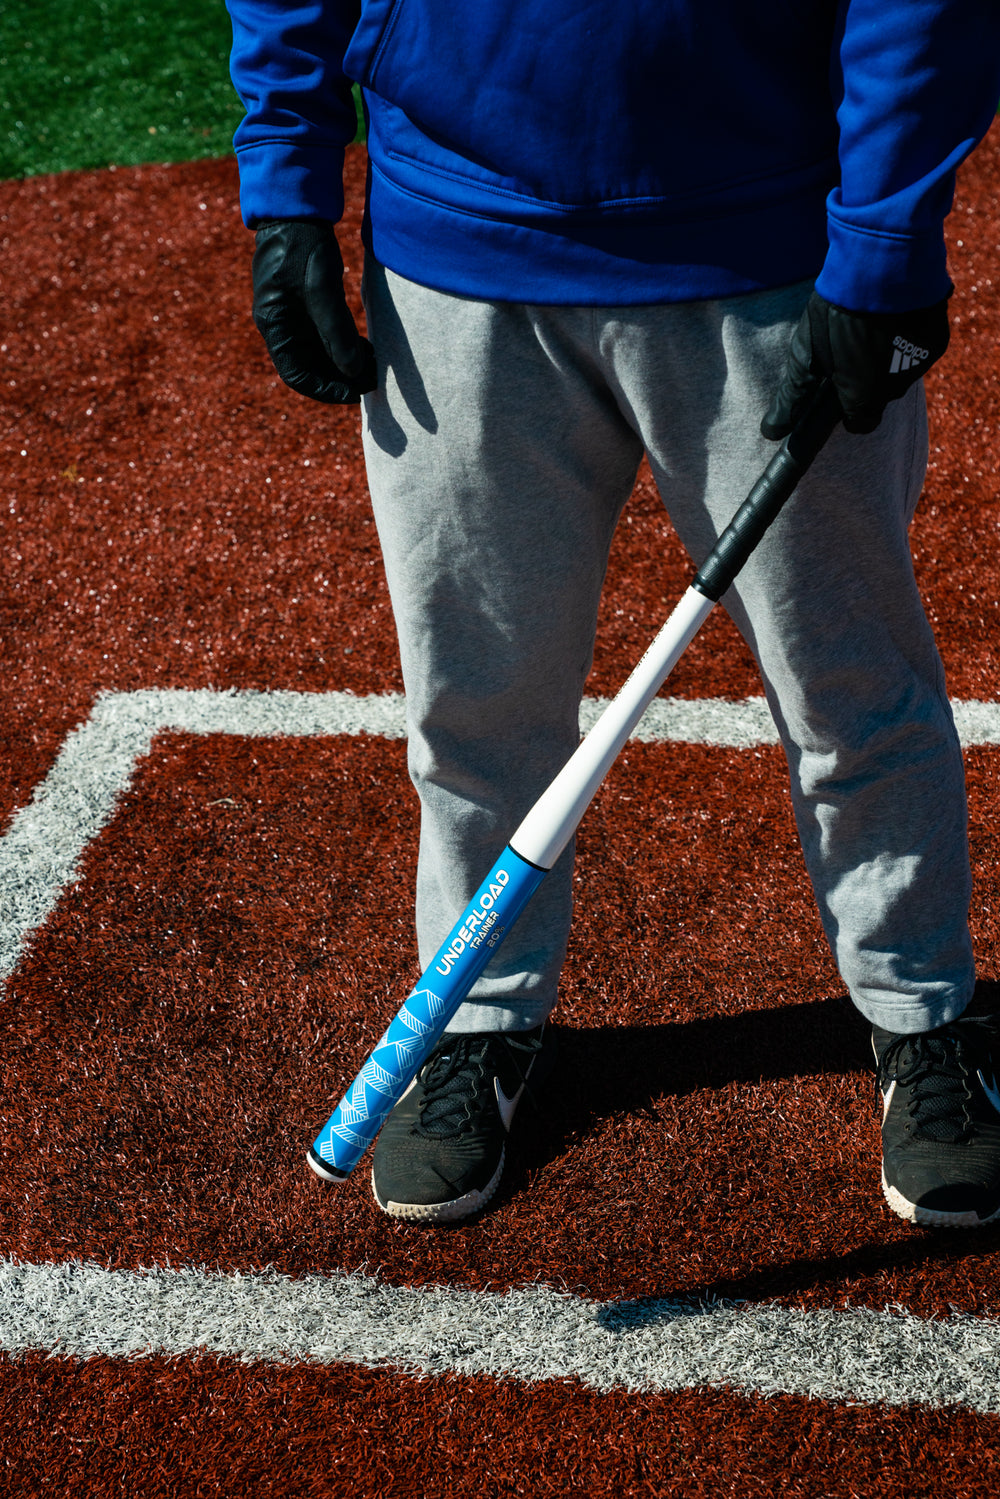 High Quality Baseball Bat for Youth - China Sport and Sporting Goods price